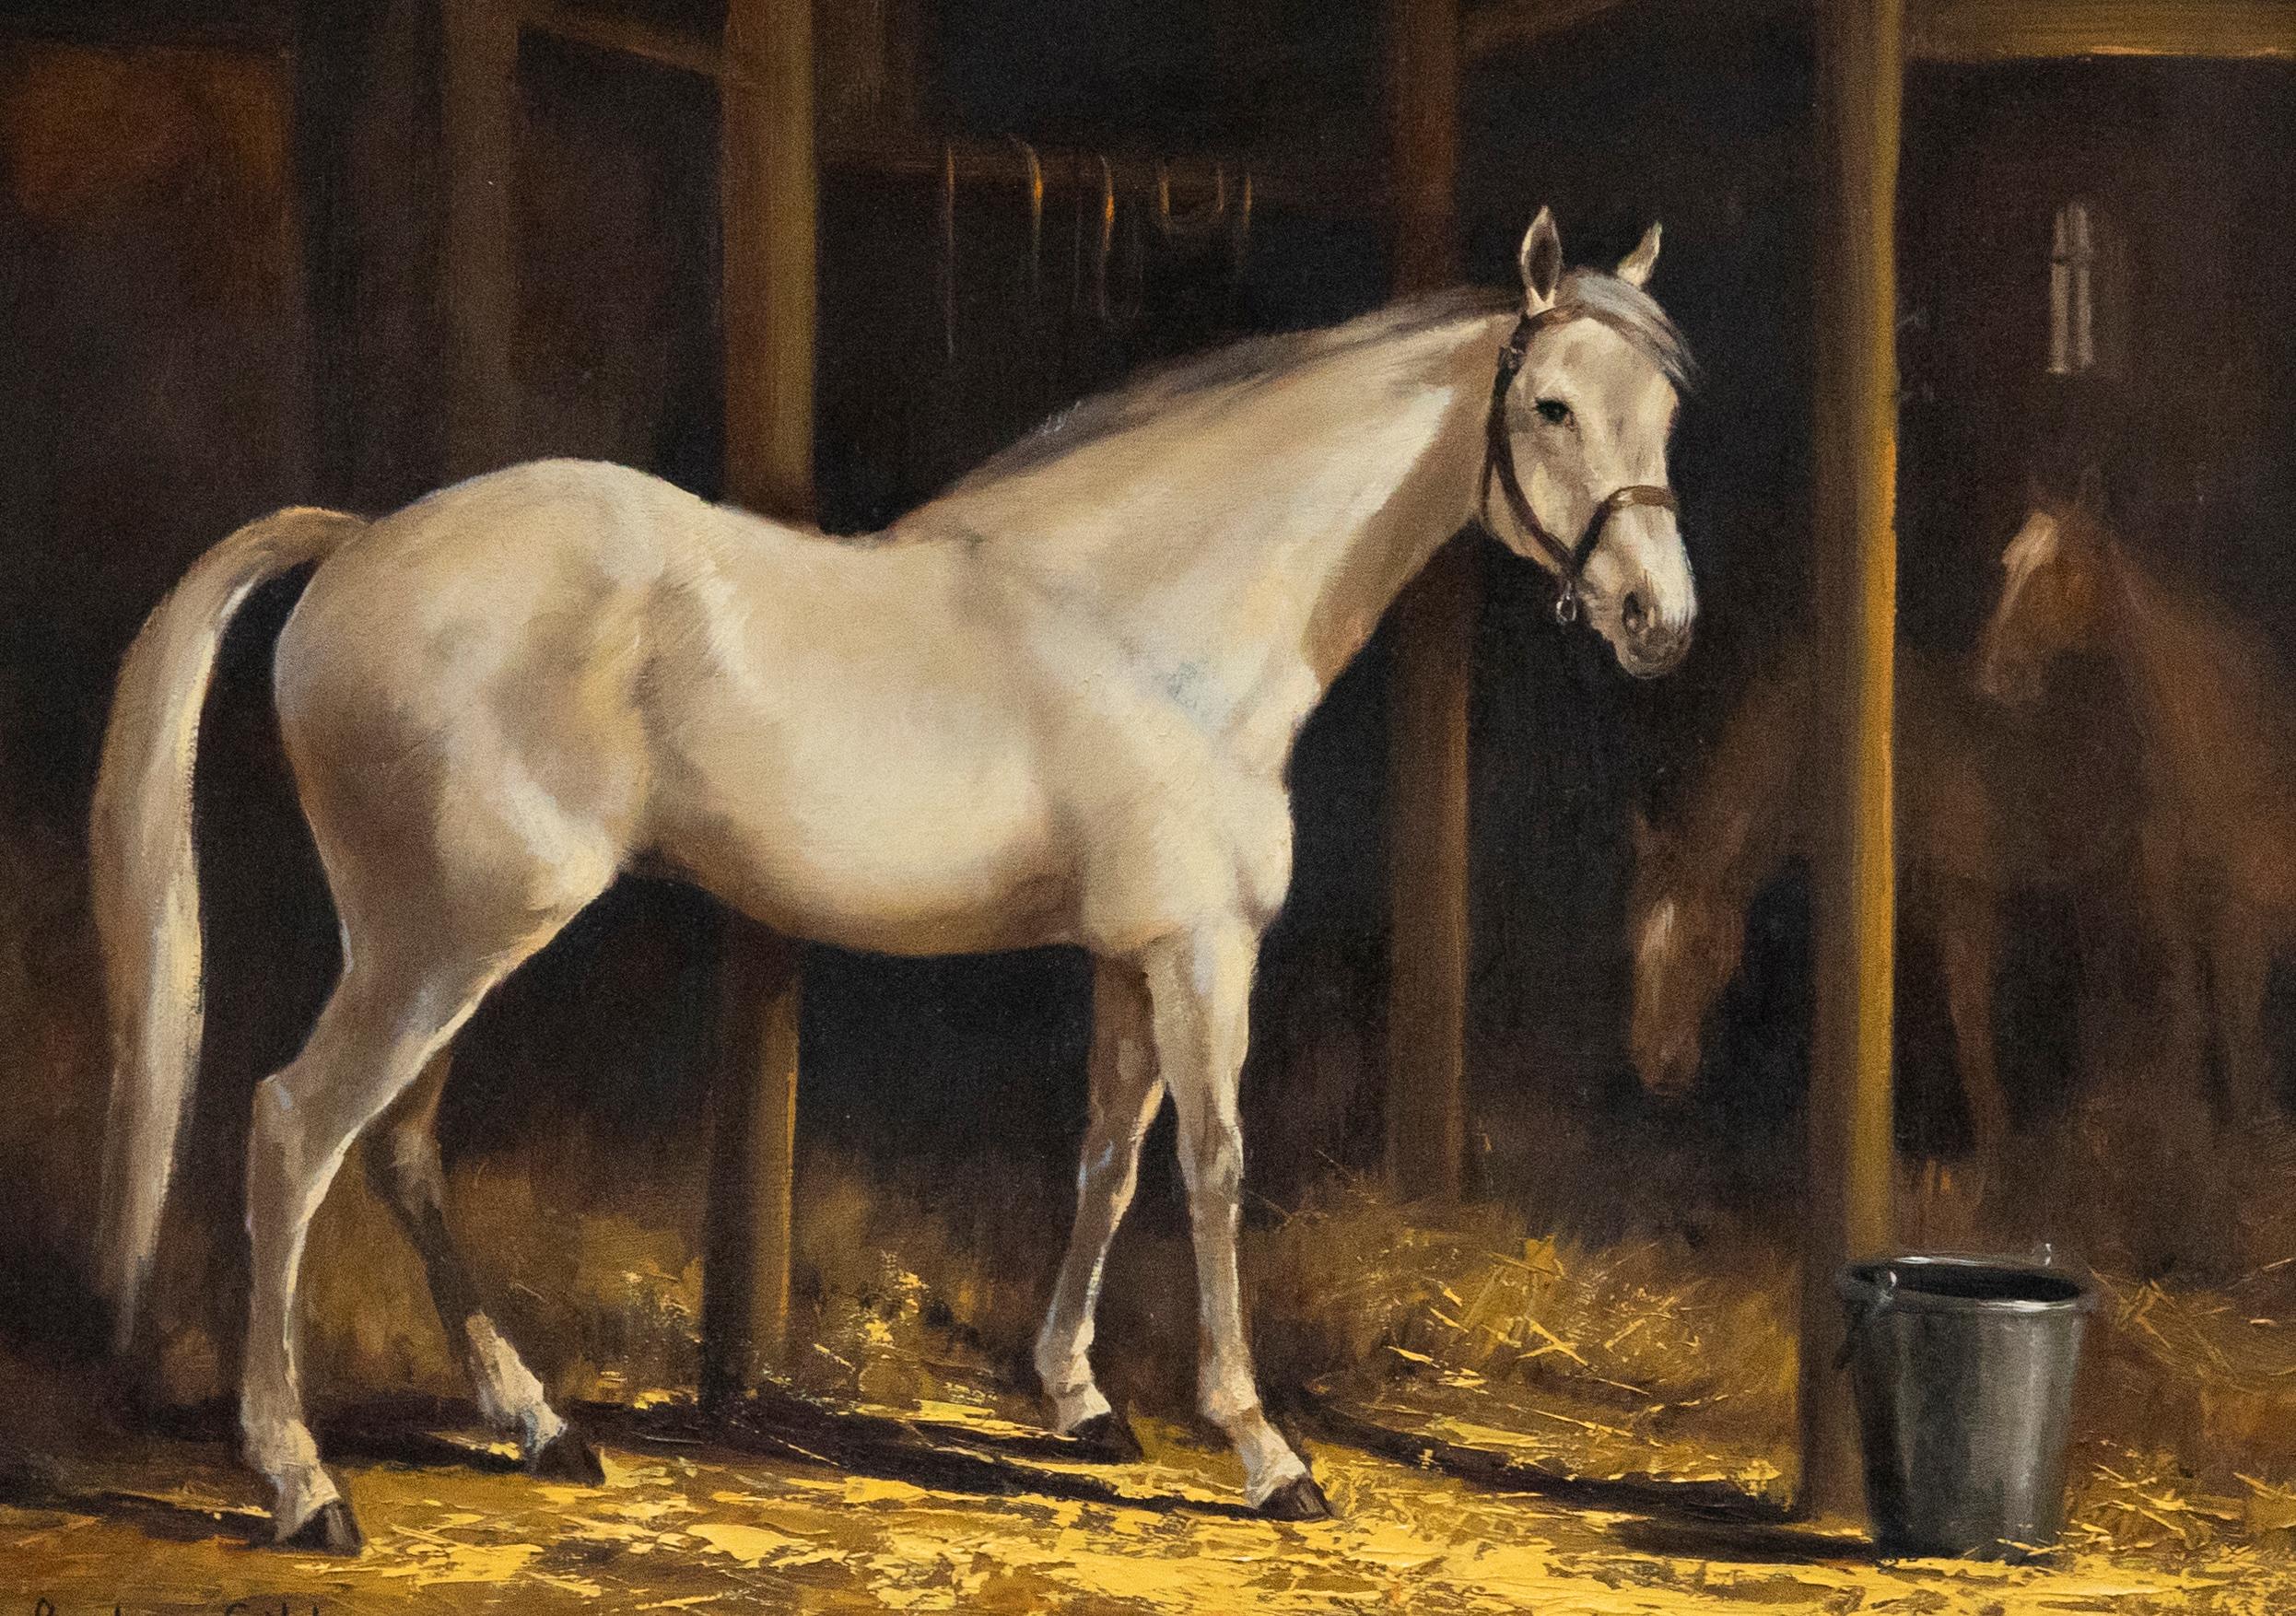 Barbara Gudrun Sibbons (b.1925) - 20th Century Oil, Grey Horse in a Stable - Painting by Unknown